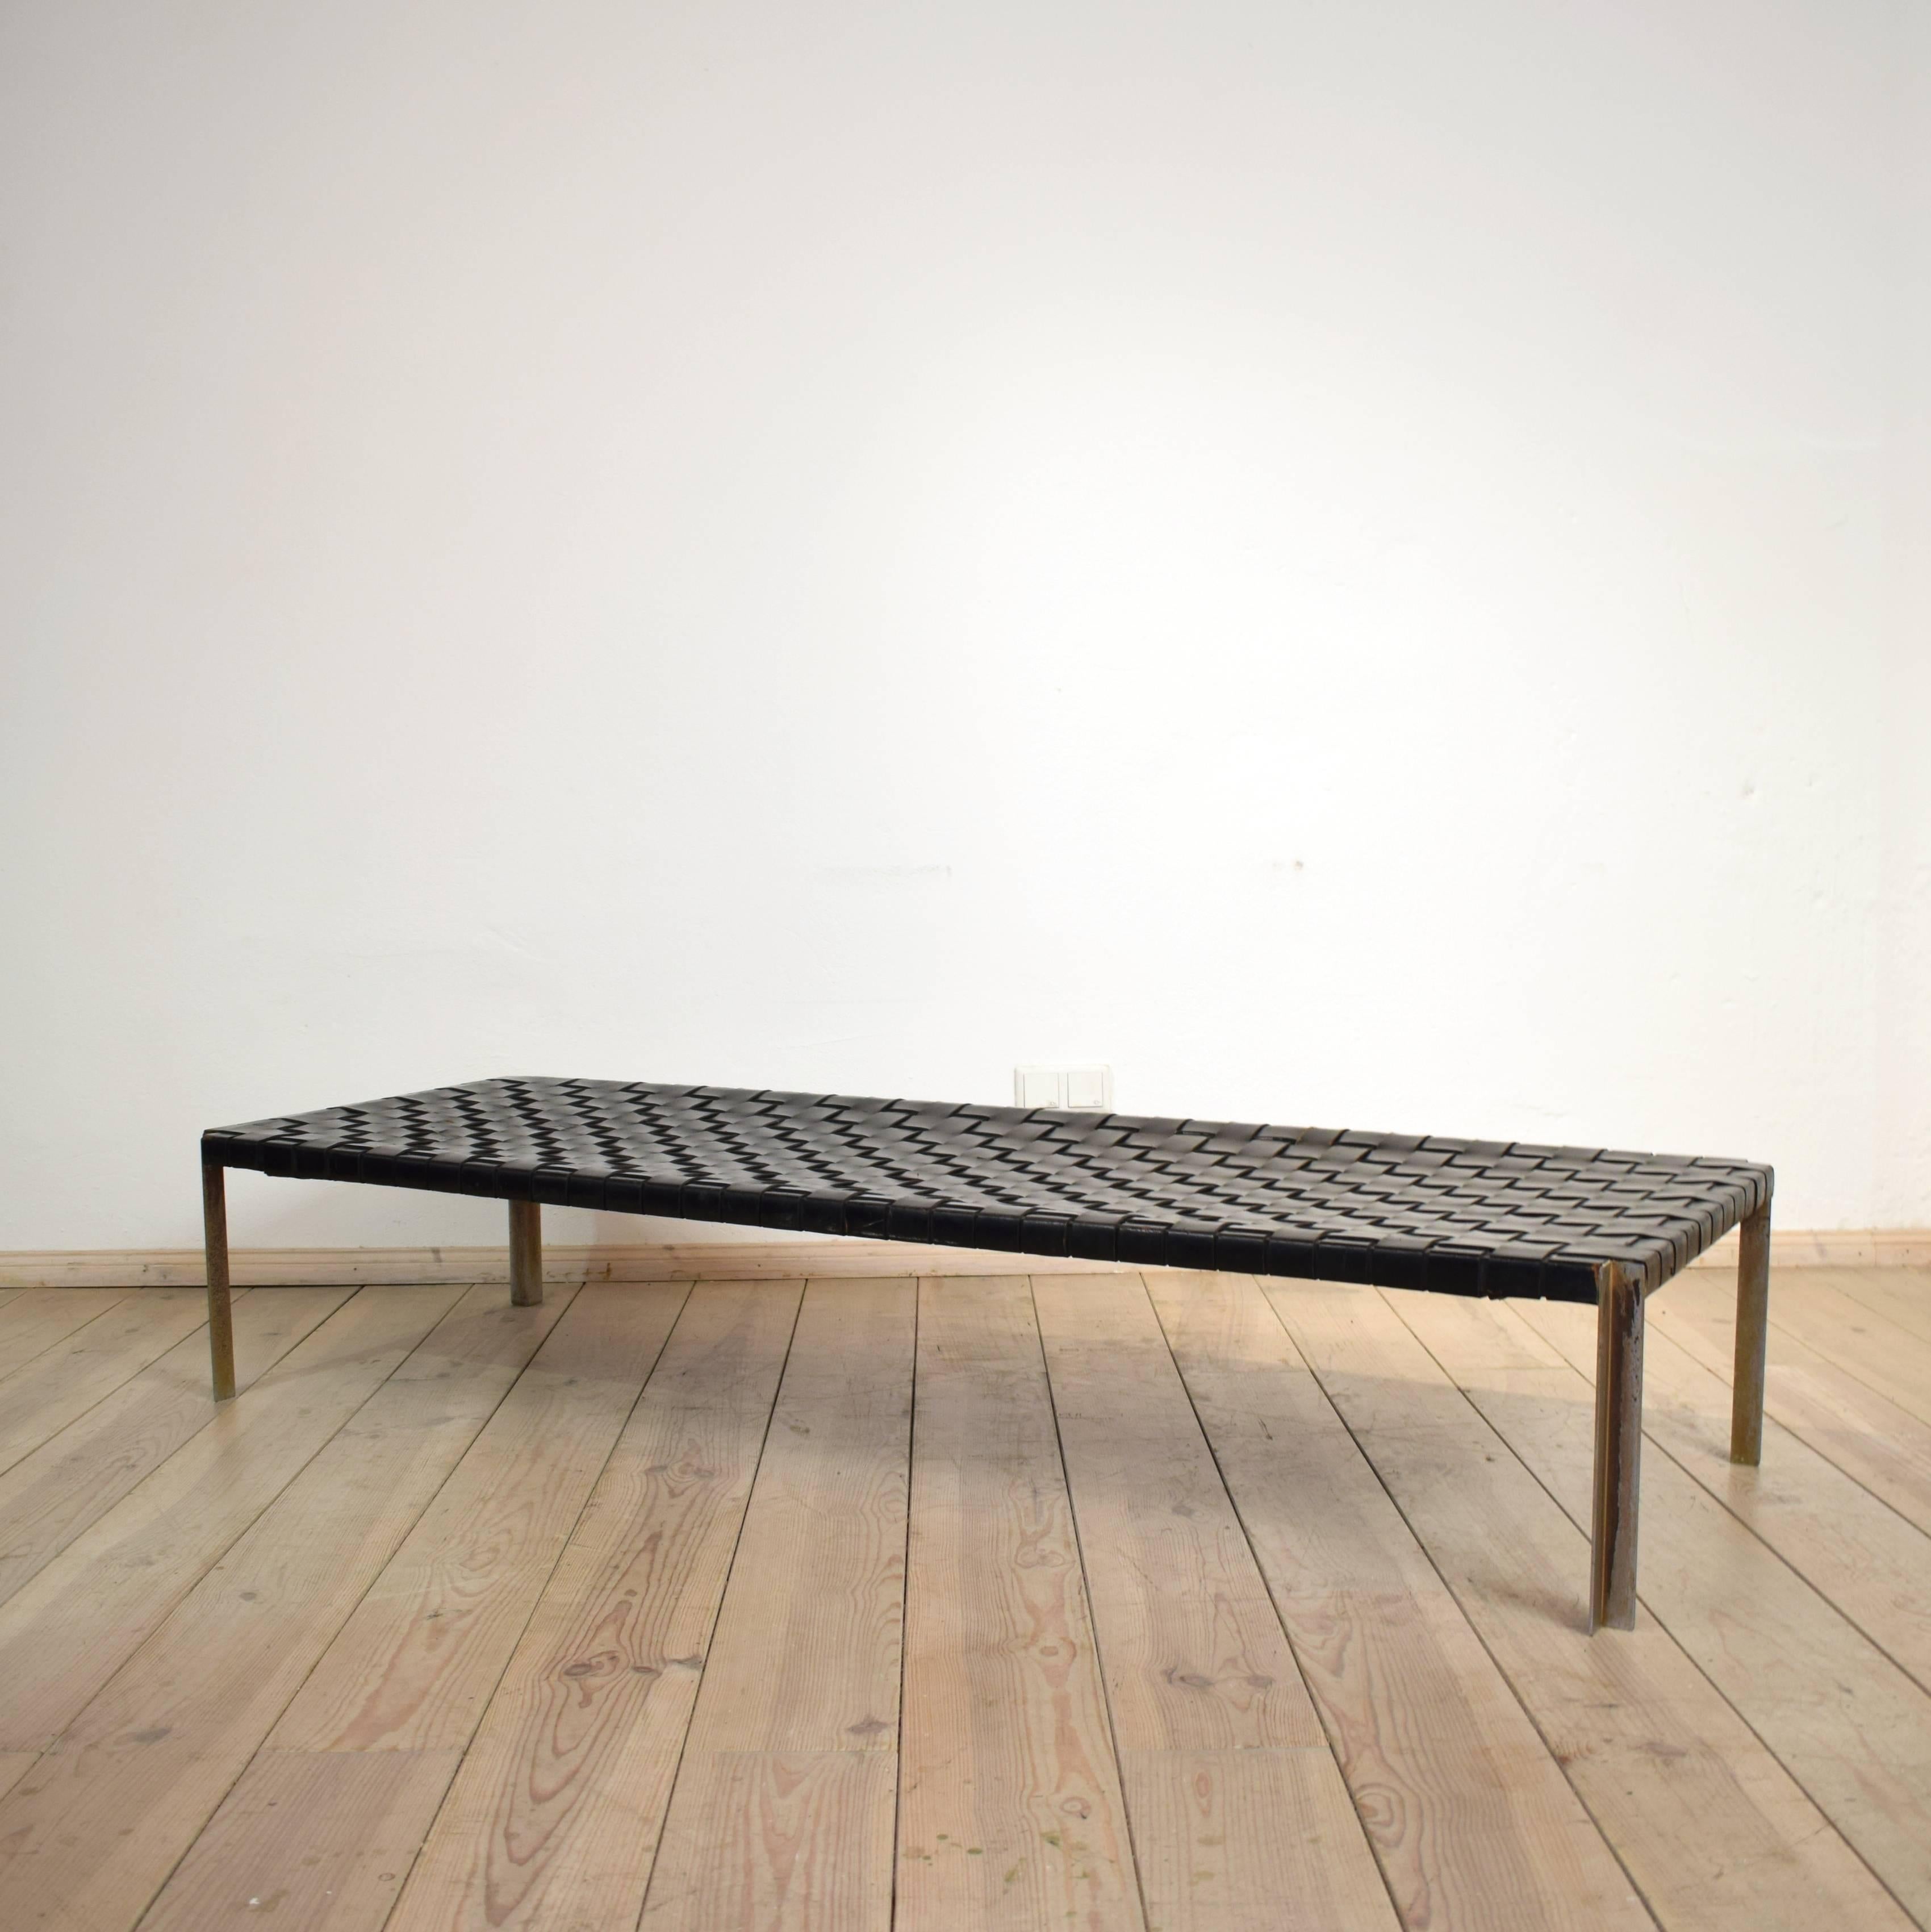 This leather and chrome daybed was designed by Erwin and Estelle Laverne in the 1960s.
The daybed has his original leather and shows a great patina. The chrome legs are suffered a bit and shows partly the metal underneath.
It is a rare and elegant